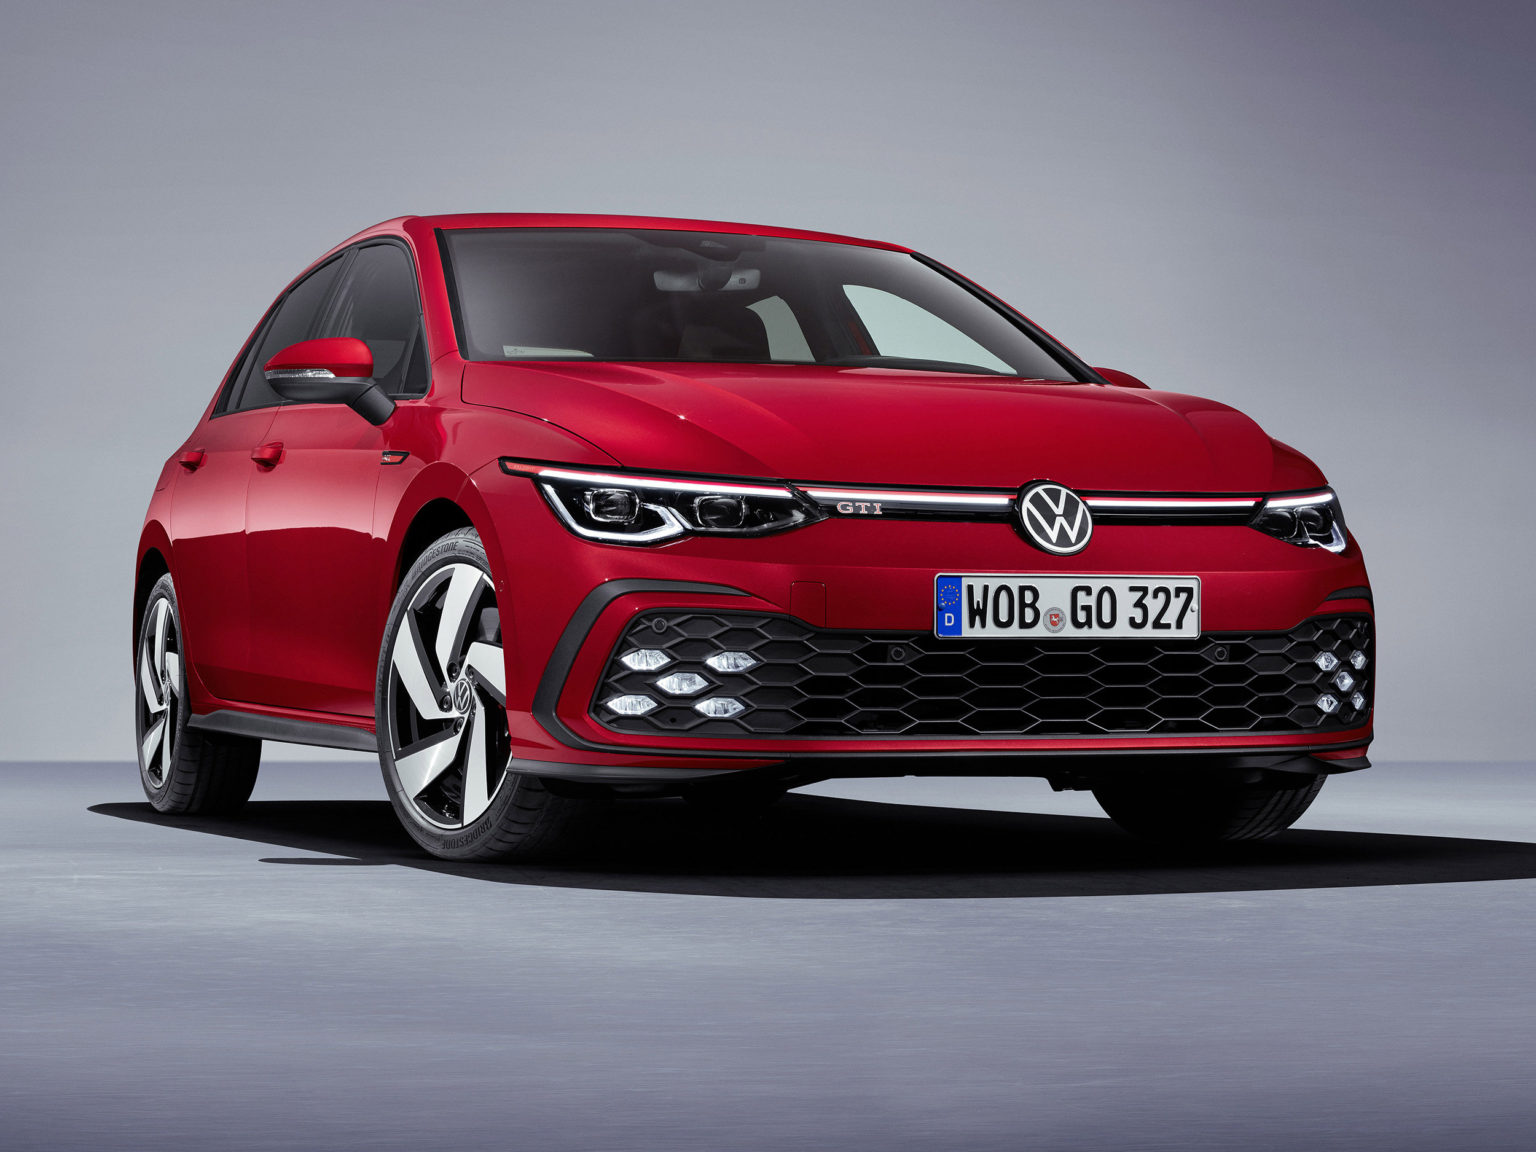 The Golf adopts a more aerodynamic and modern appearance for the 2021 model year.